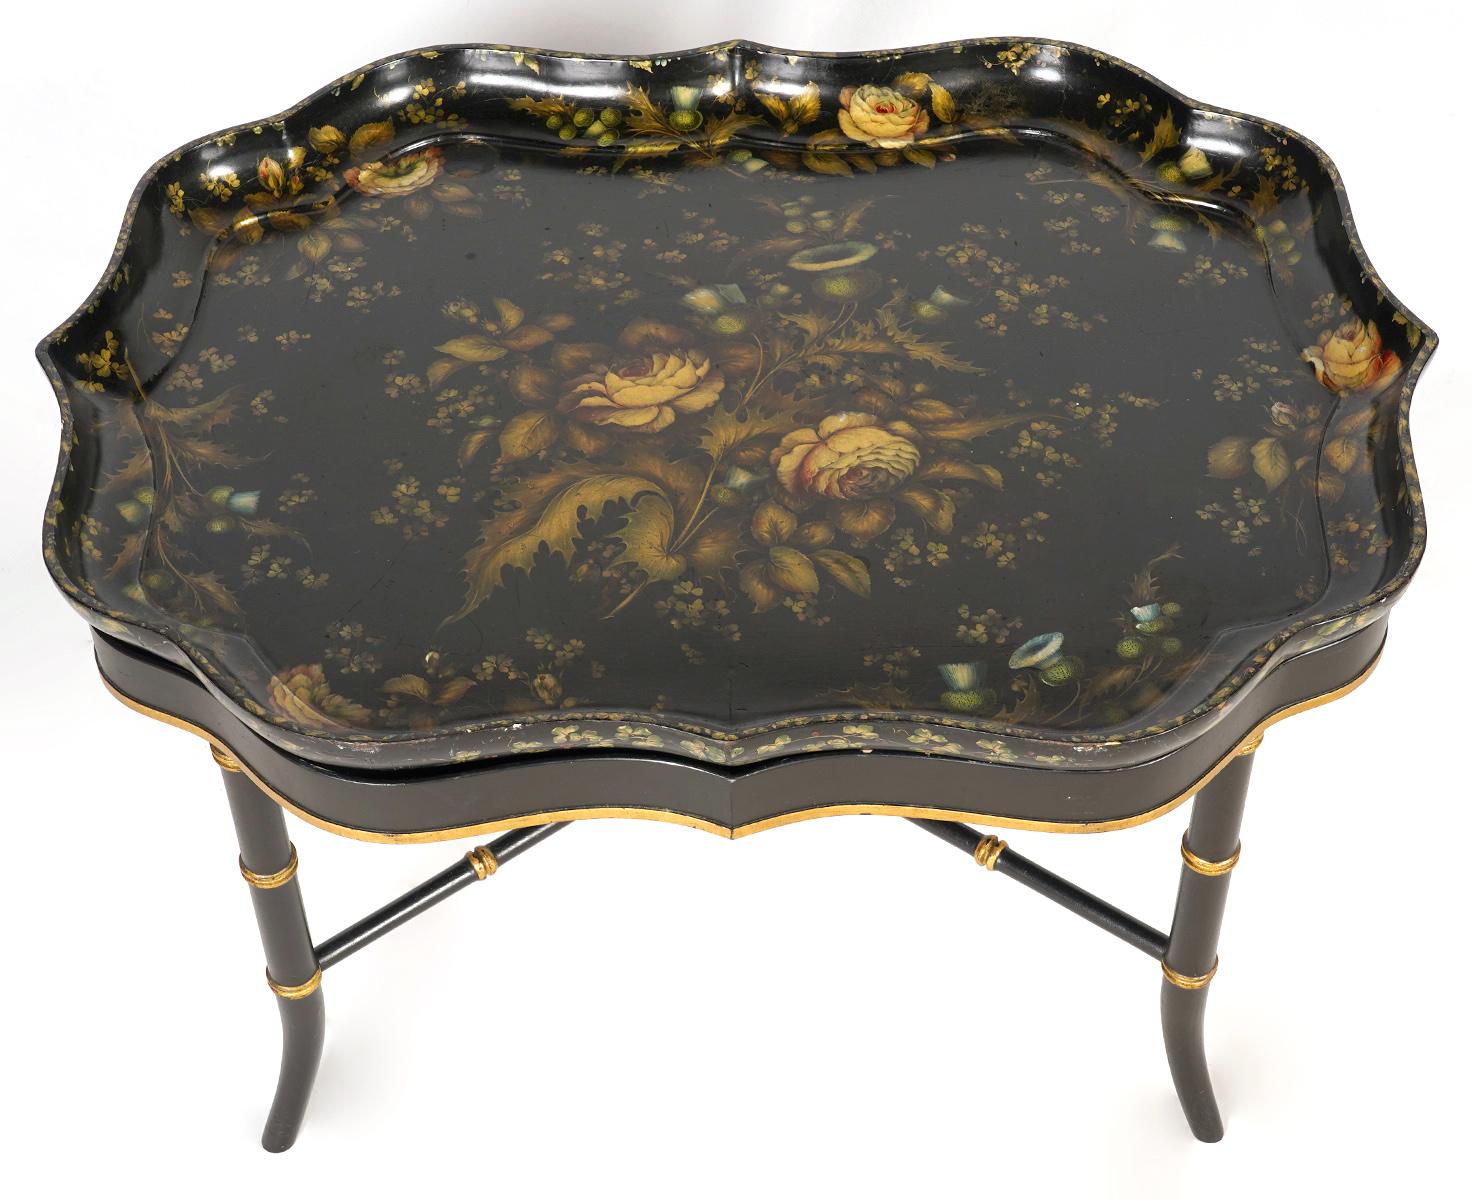 This wonderfully decorated papier mâché tray is made by Clay, 18 King Street, Covent Garden, a maker of great distinction whose trays are exhibited at the Victoria and Albert Museum. The tray is decorated with expertly painted polychrome flowers